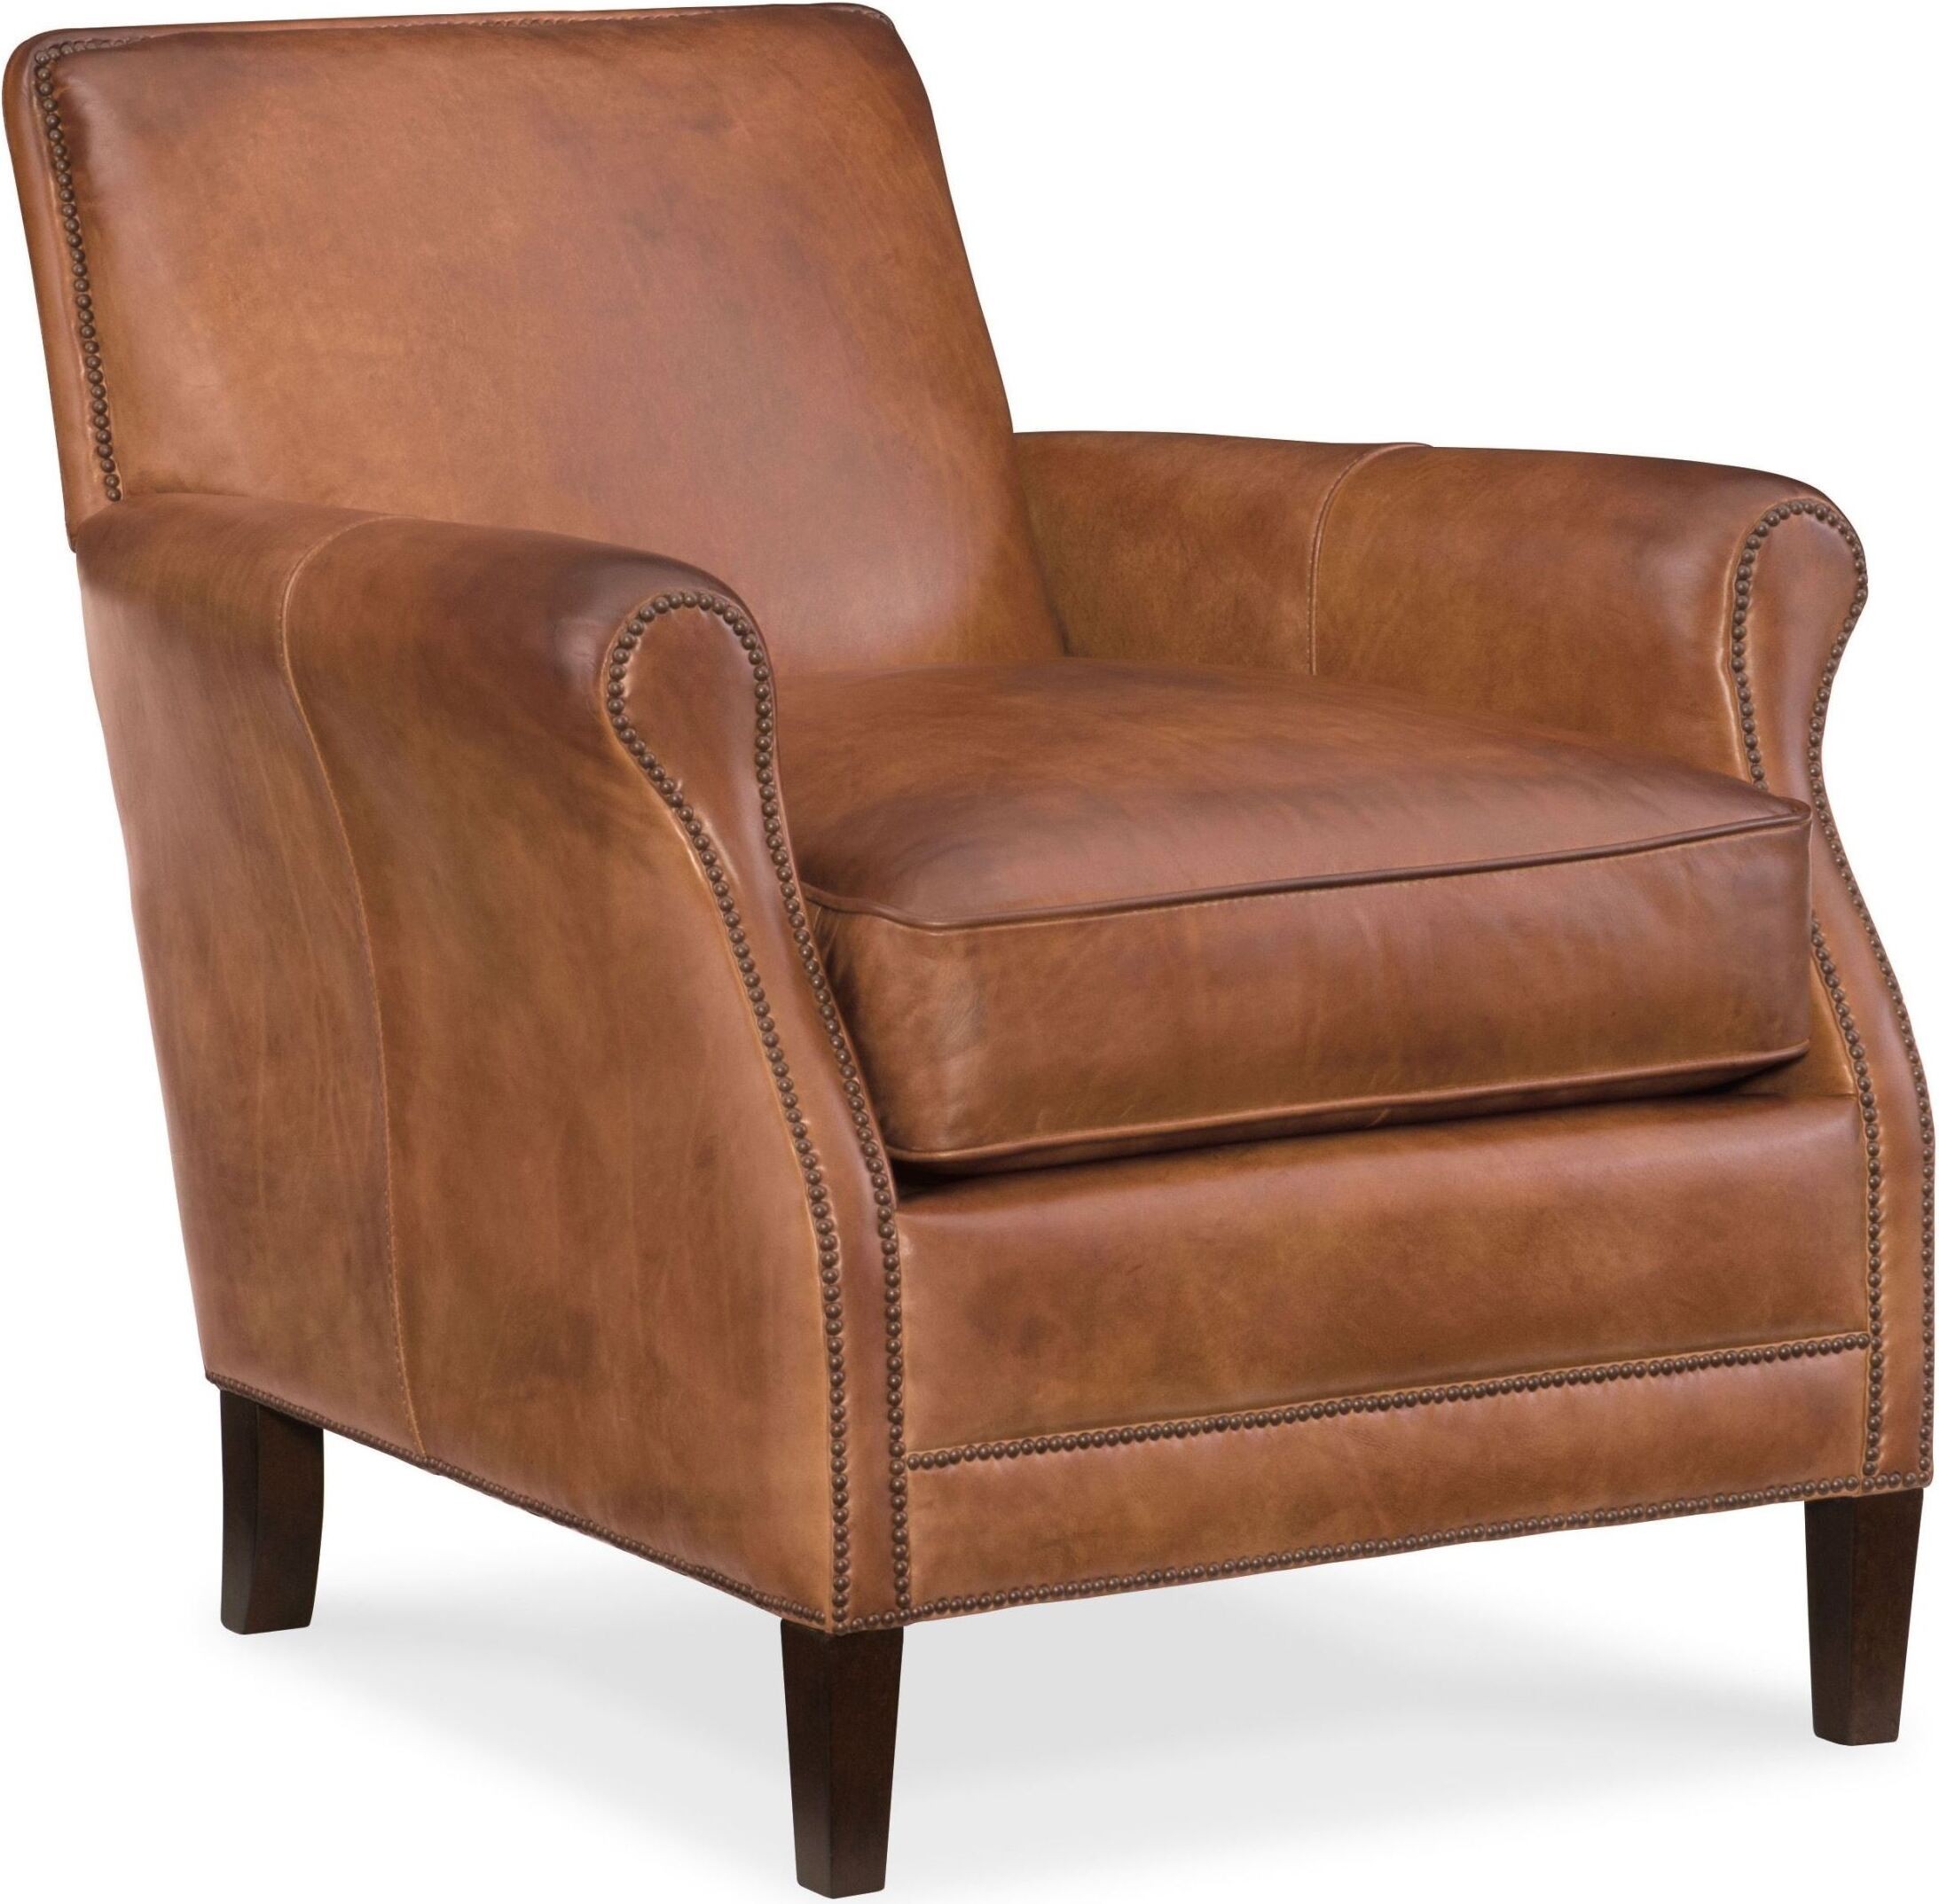 Royce Natchez Brown Leather Club Chair, Tan Leather Club Chair